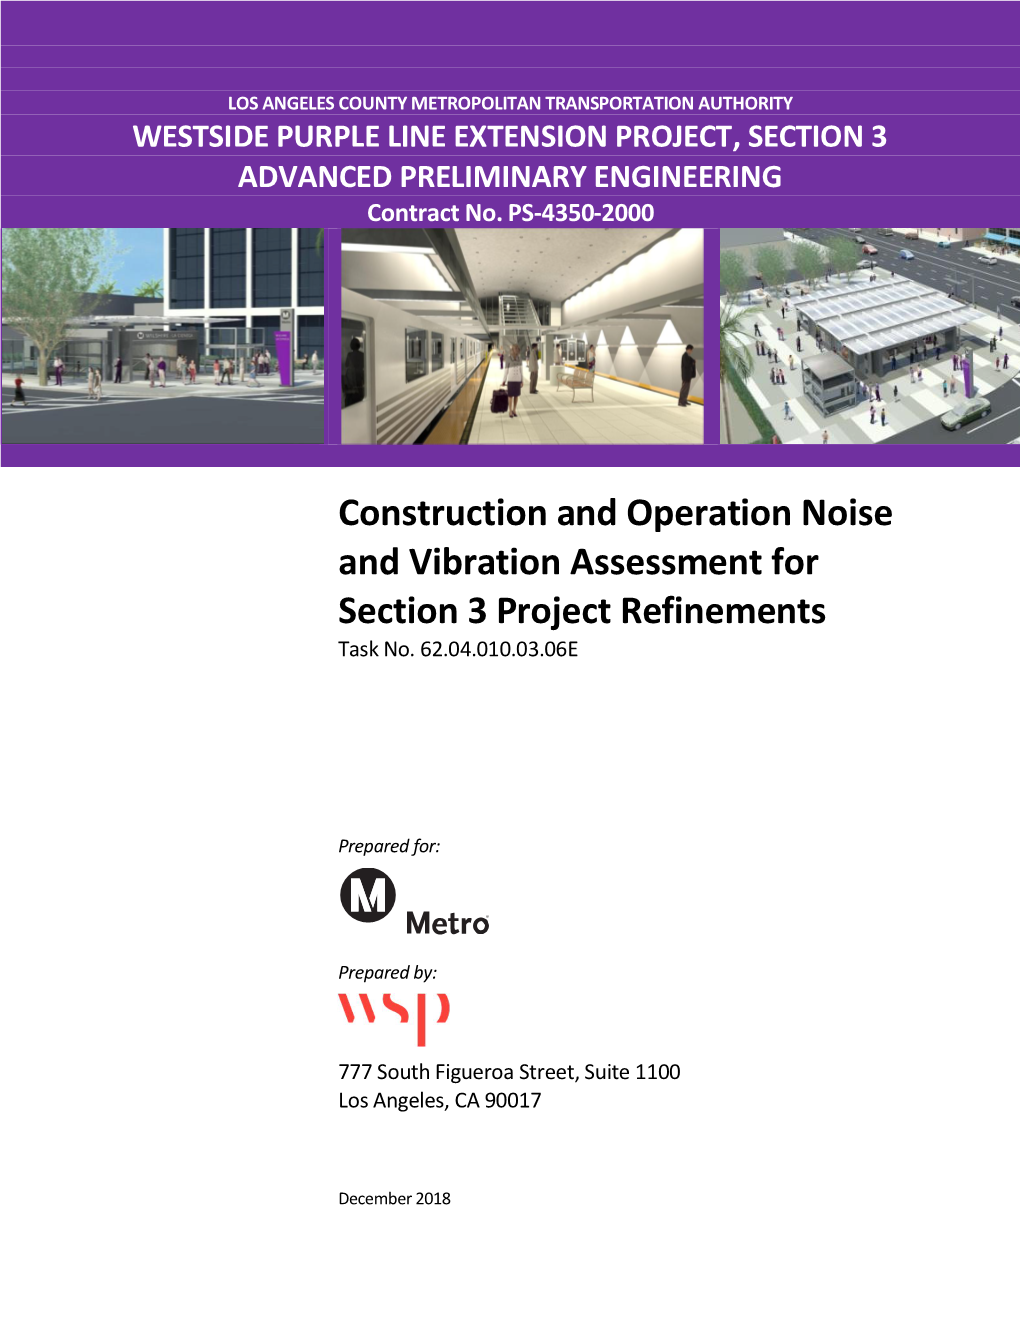 Construction and Operation Noise and Vibration Assessment for Section 3 Project Refinements Task No